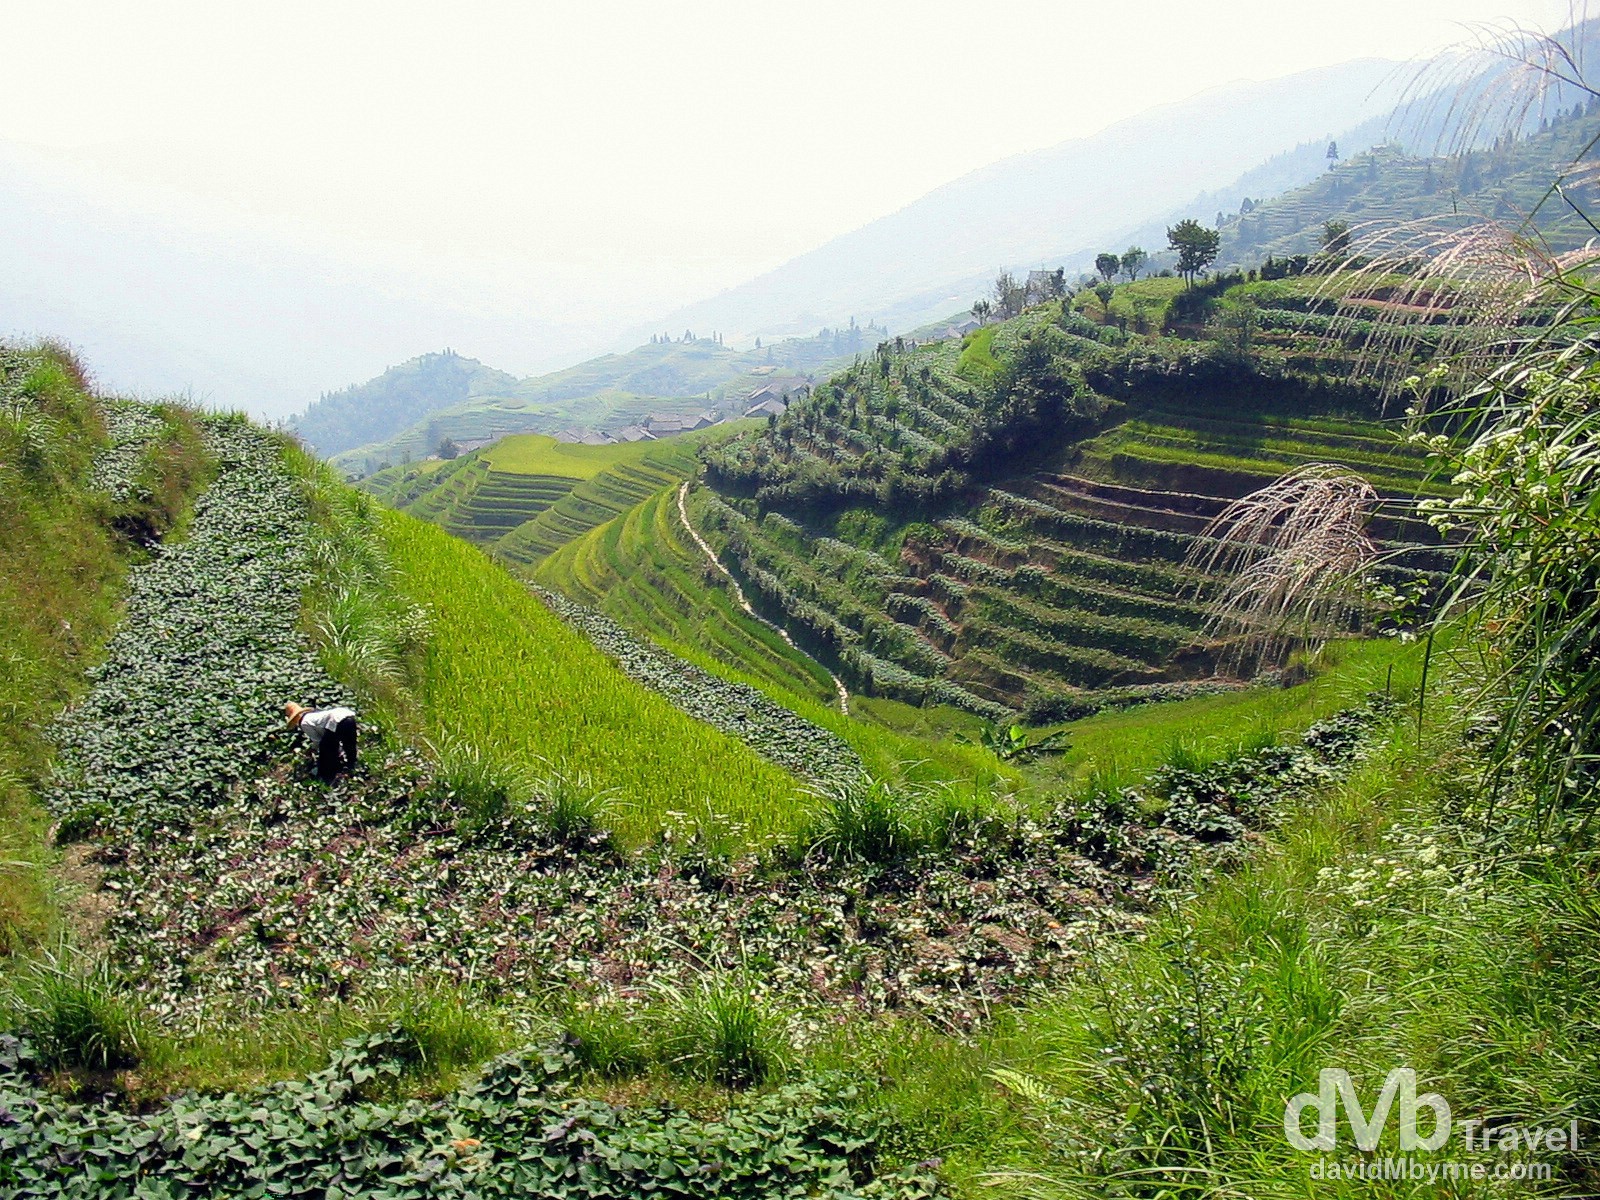 Tending to crops in the hills over Ping An Zhuang minority village, Longji Mountains, Guangxi Province, Southern China. September 15th, 2004.